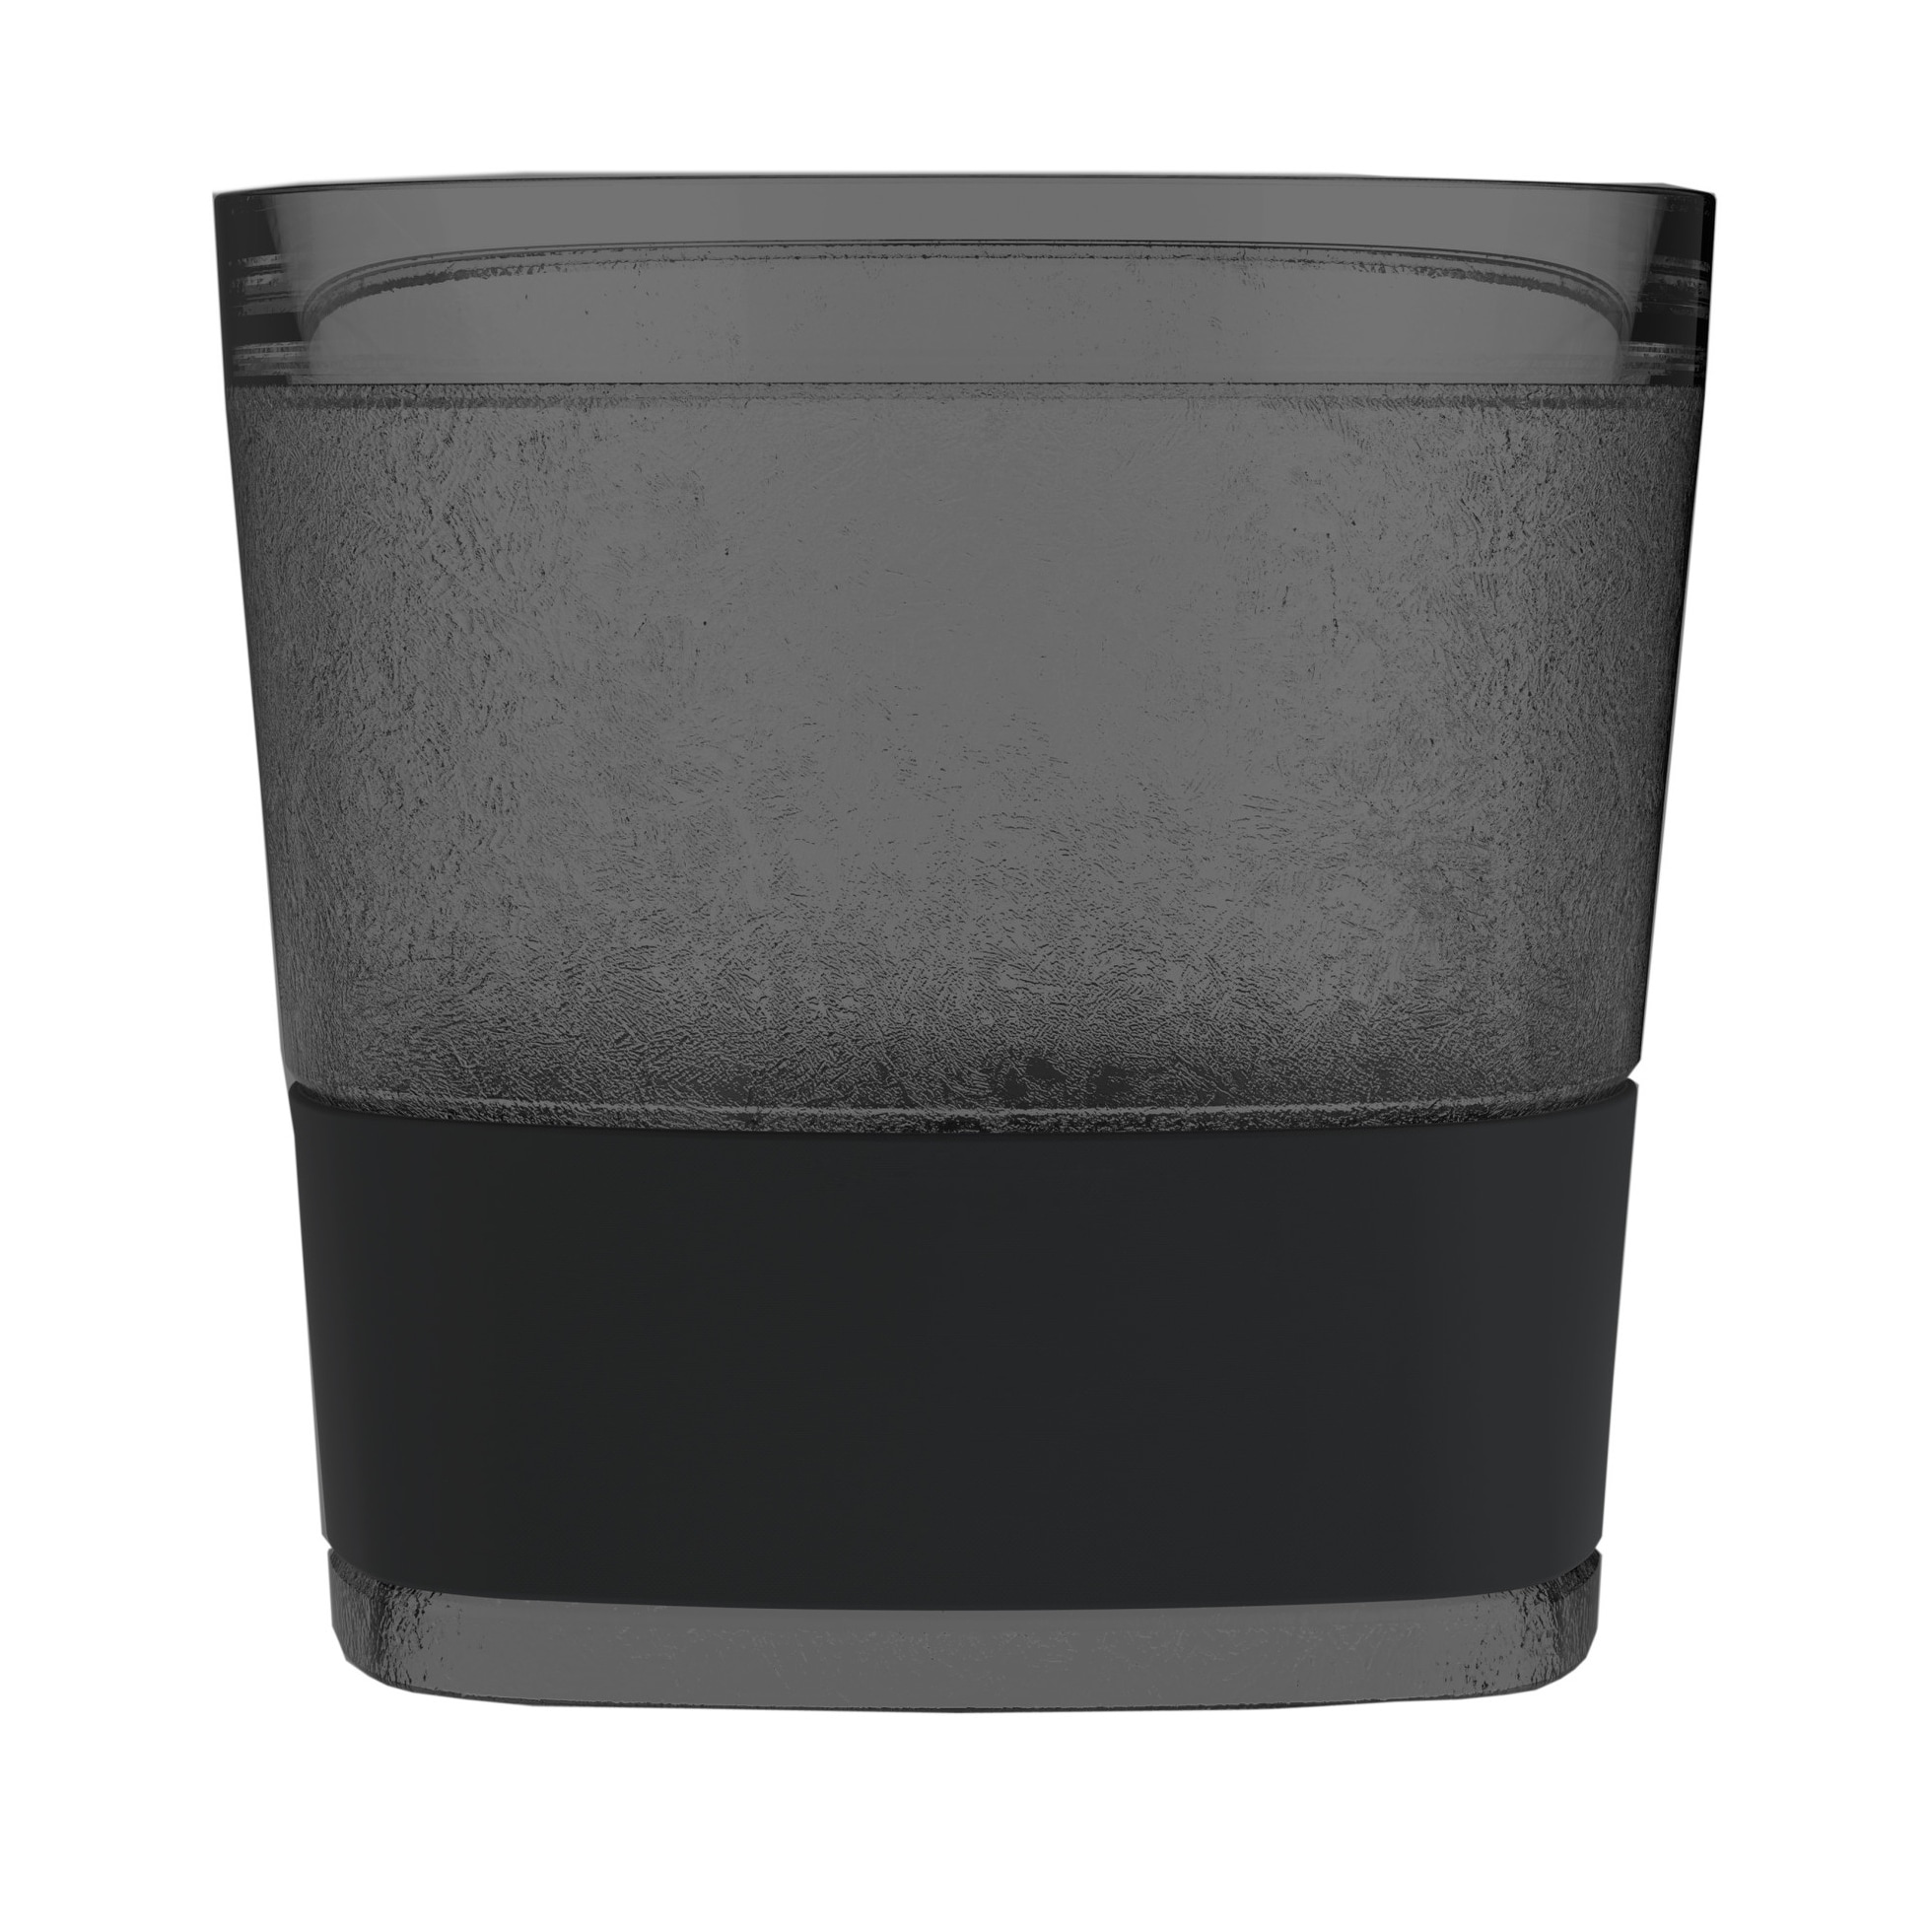 https://ak1.ostkcdn.com/images/products/is/images/direct/41b0d2c33fba0c9627fffaf0d0b81103a8c3e874/Whiskey-FREEZE-Cooling-Cup-in-Smoke-by-HOST-%28Two-Pack%29.jpg